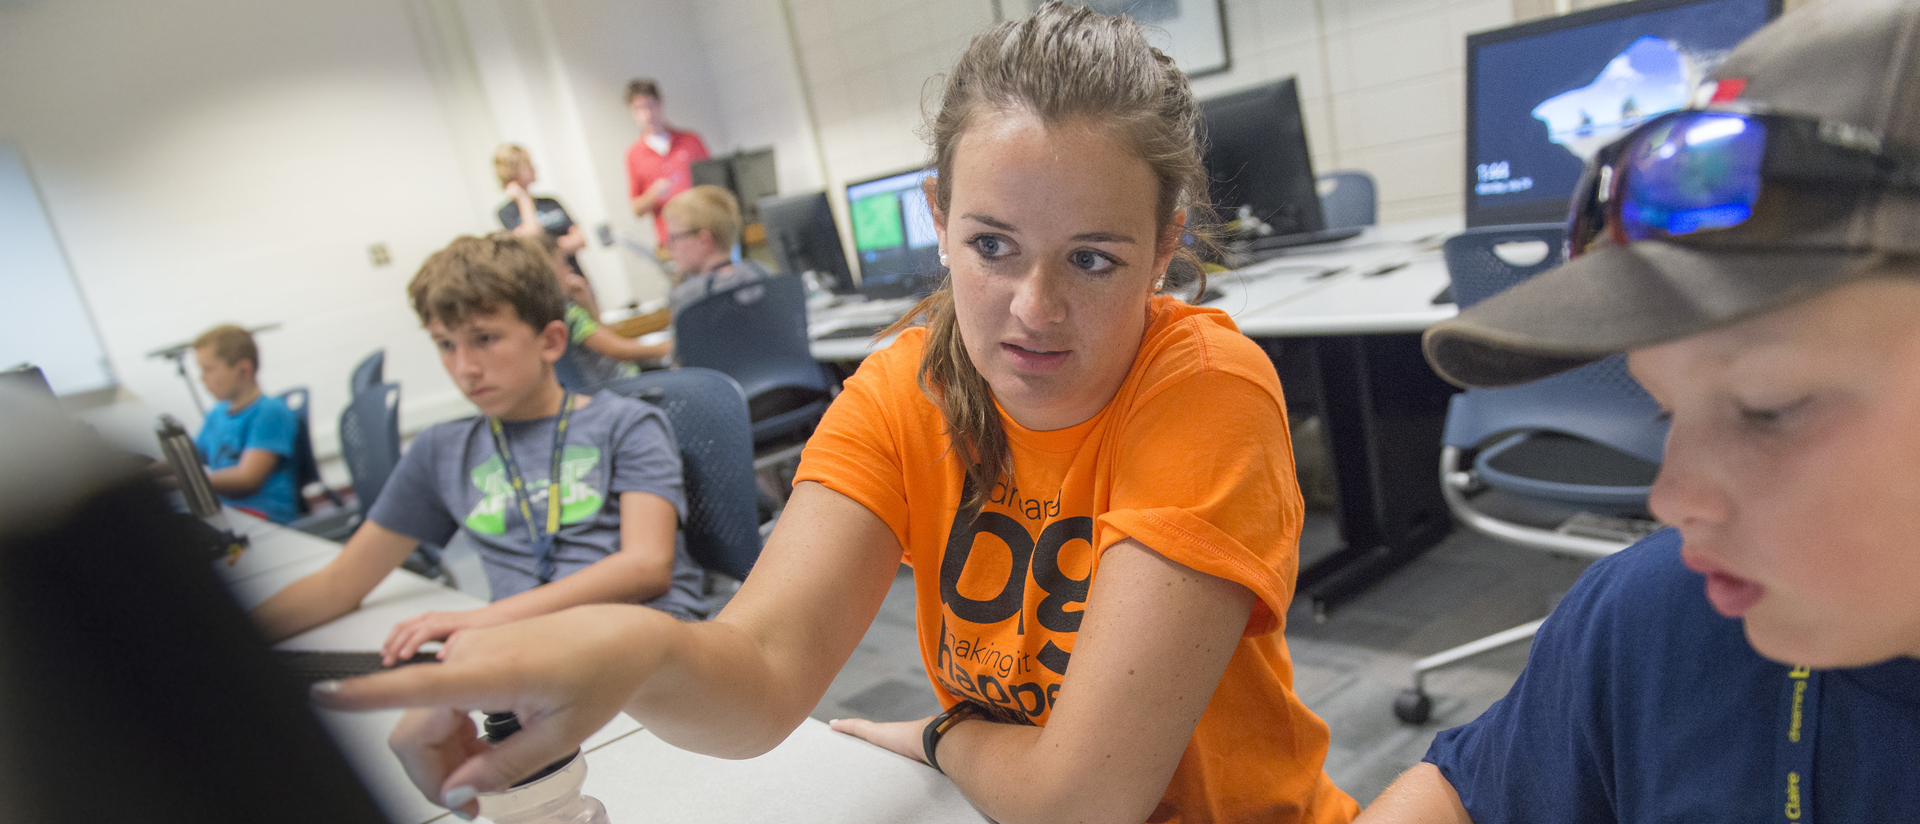 Katie Albin, a fifth-grade teacher at an Eau Claire elementary school, was one of three teachers who were part of this summer’s Blugold Beginnings coding camp. She hopes to incorporate coding into her classroom.